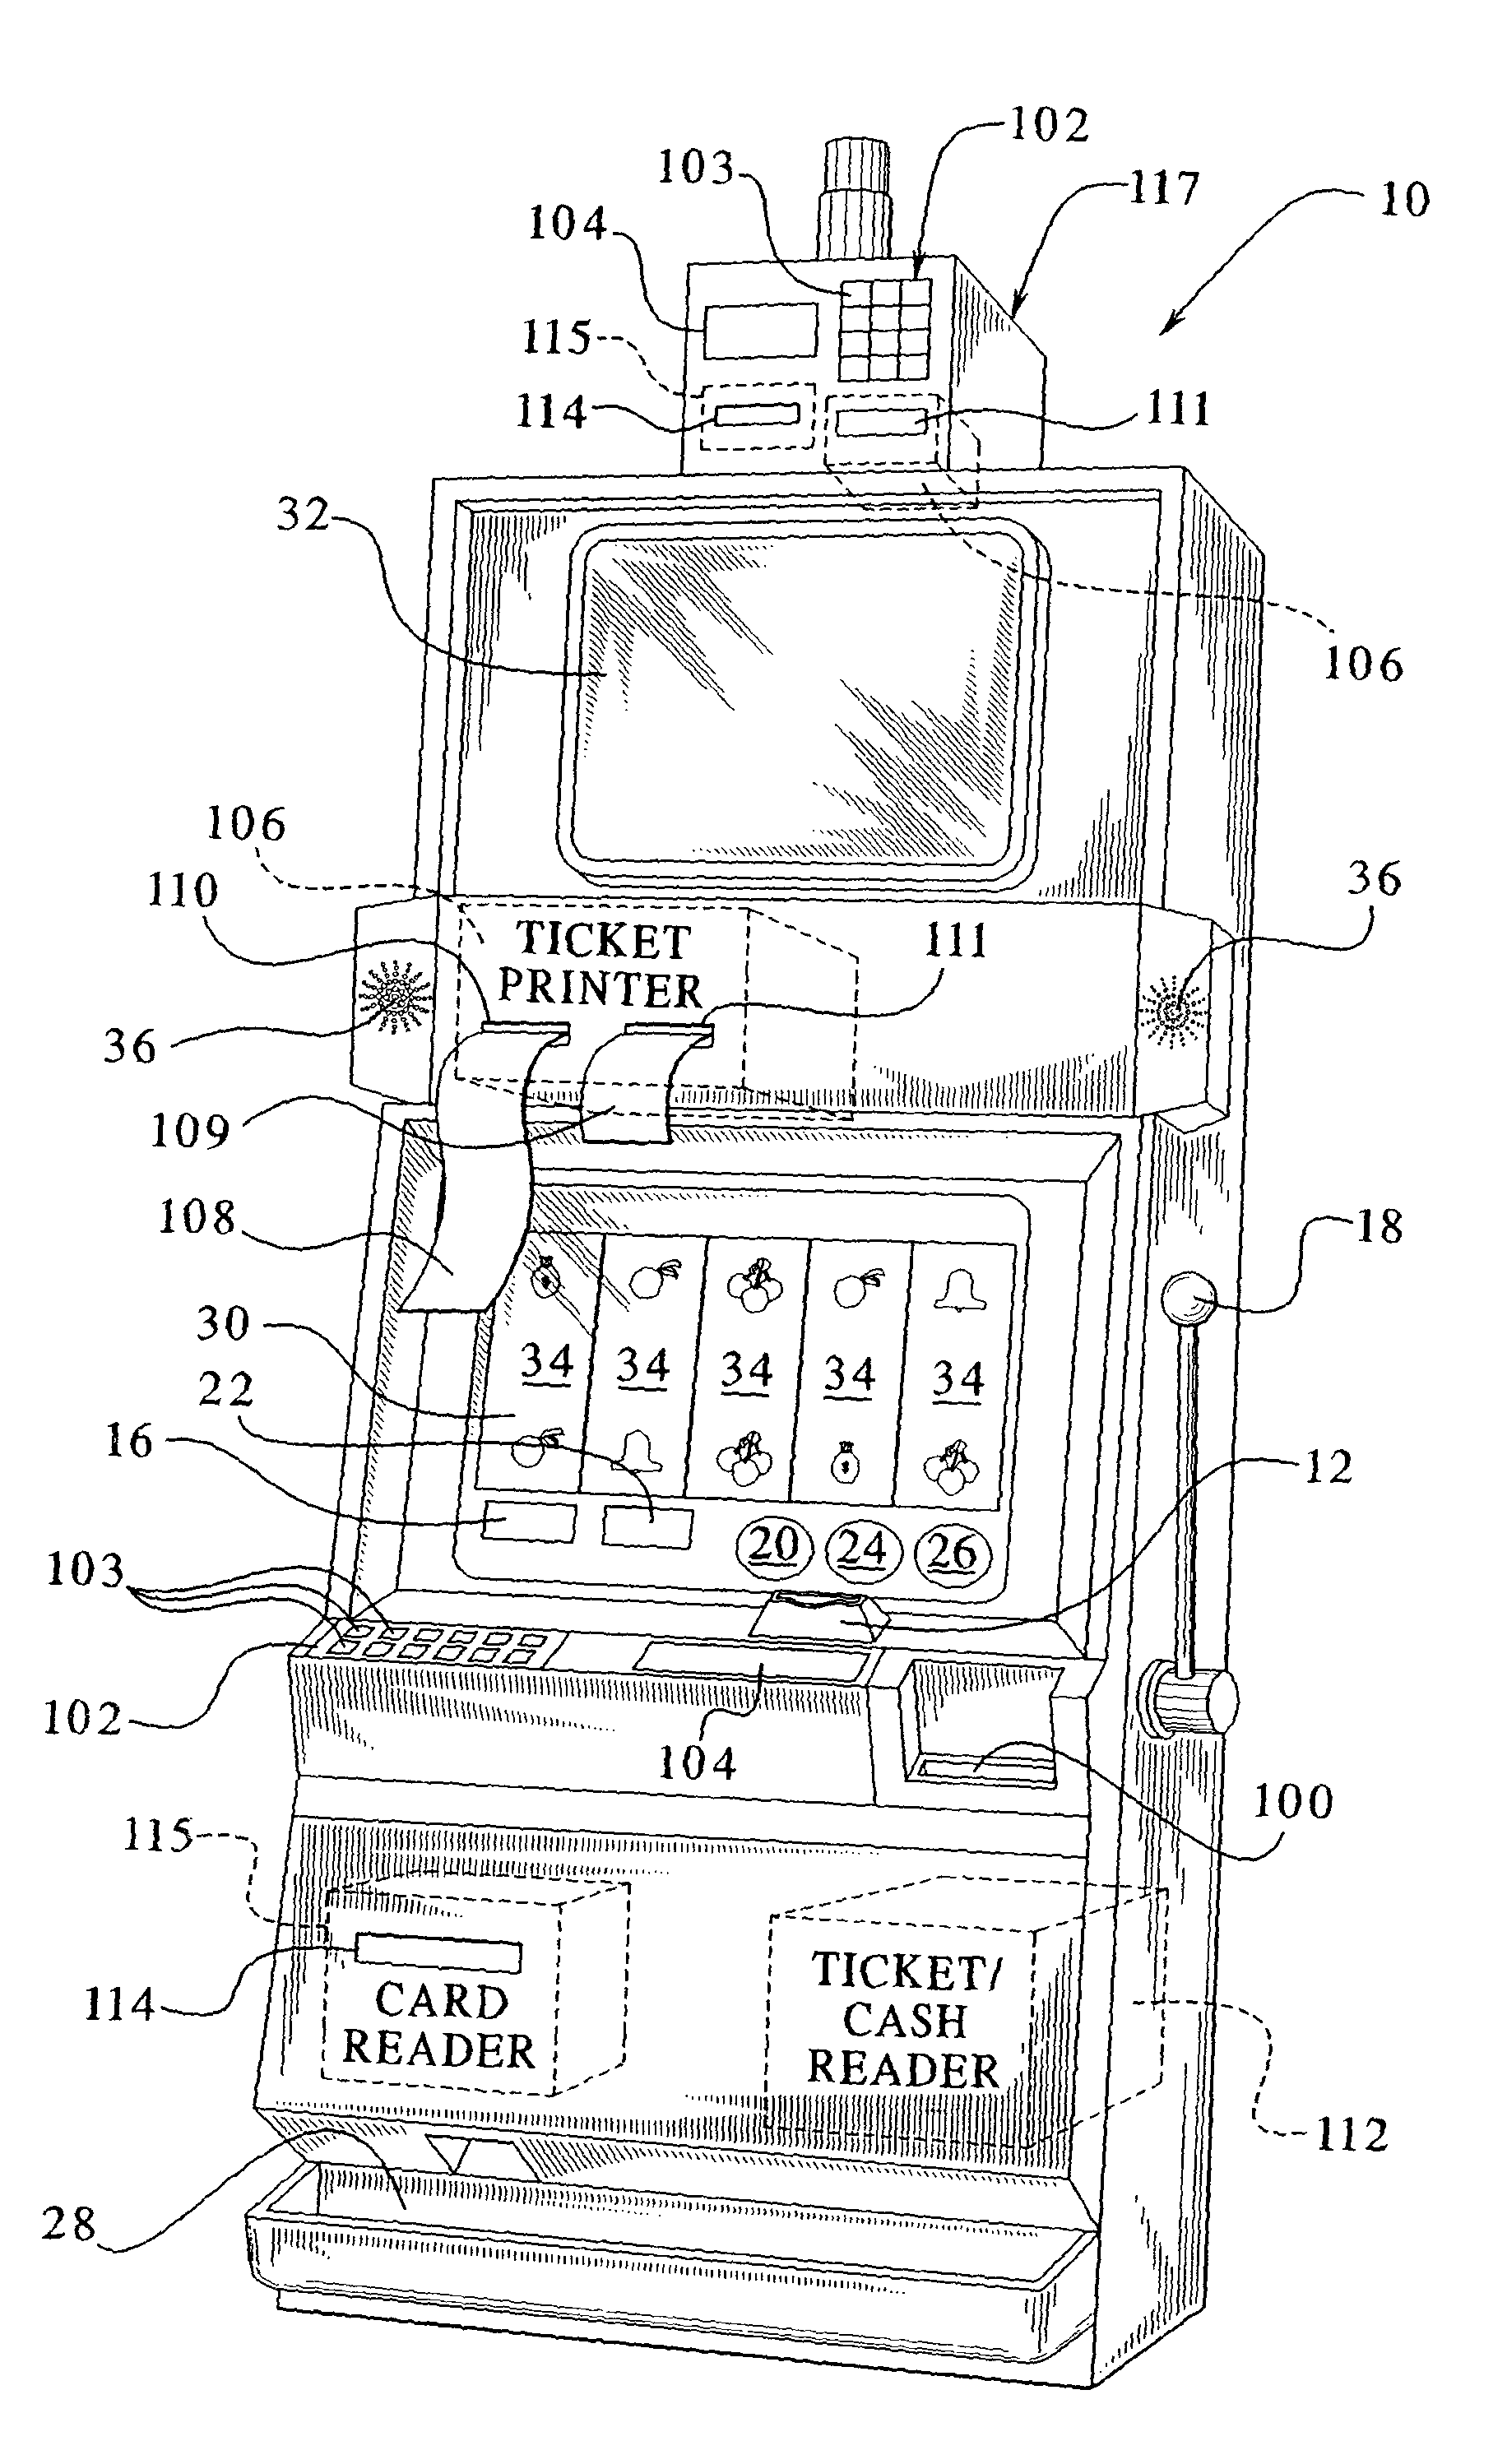 Gaming device having an electronic funds transfer system